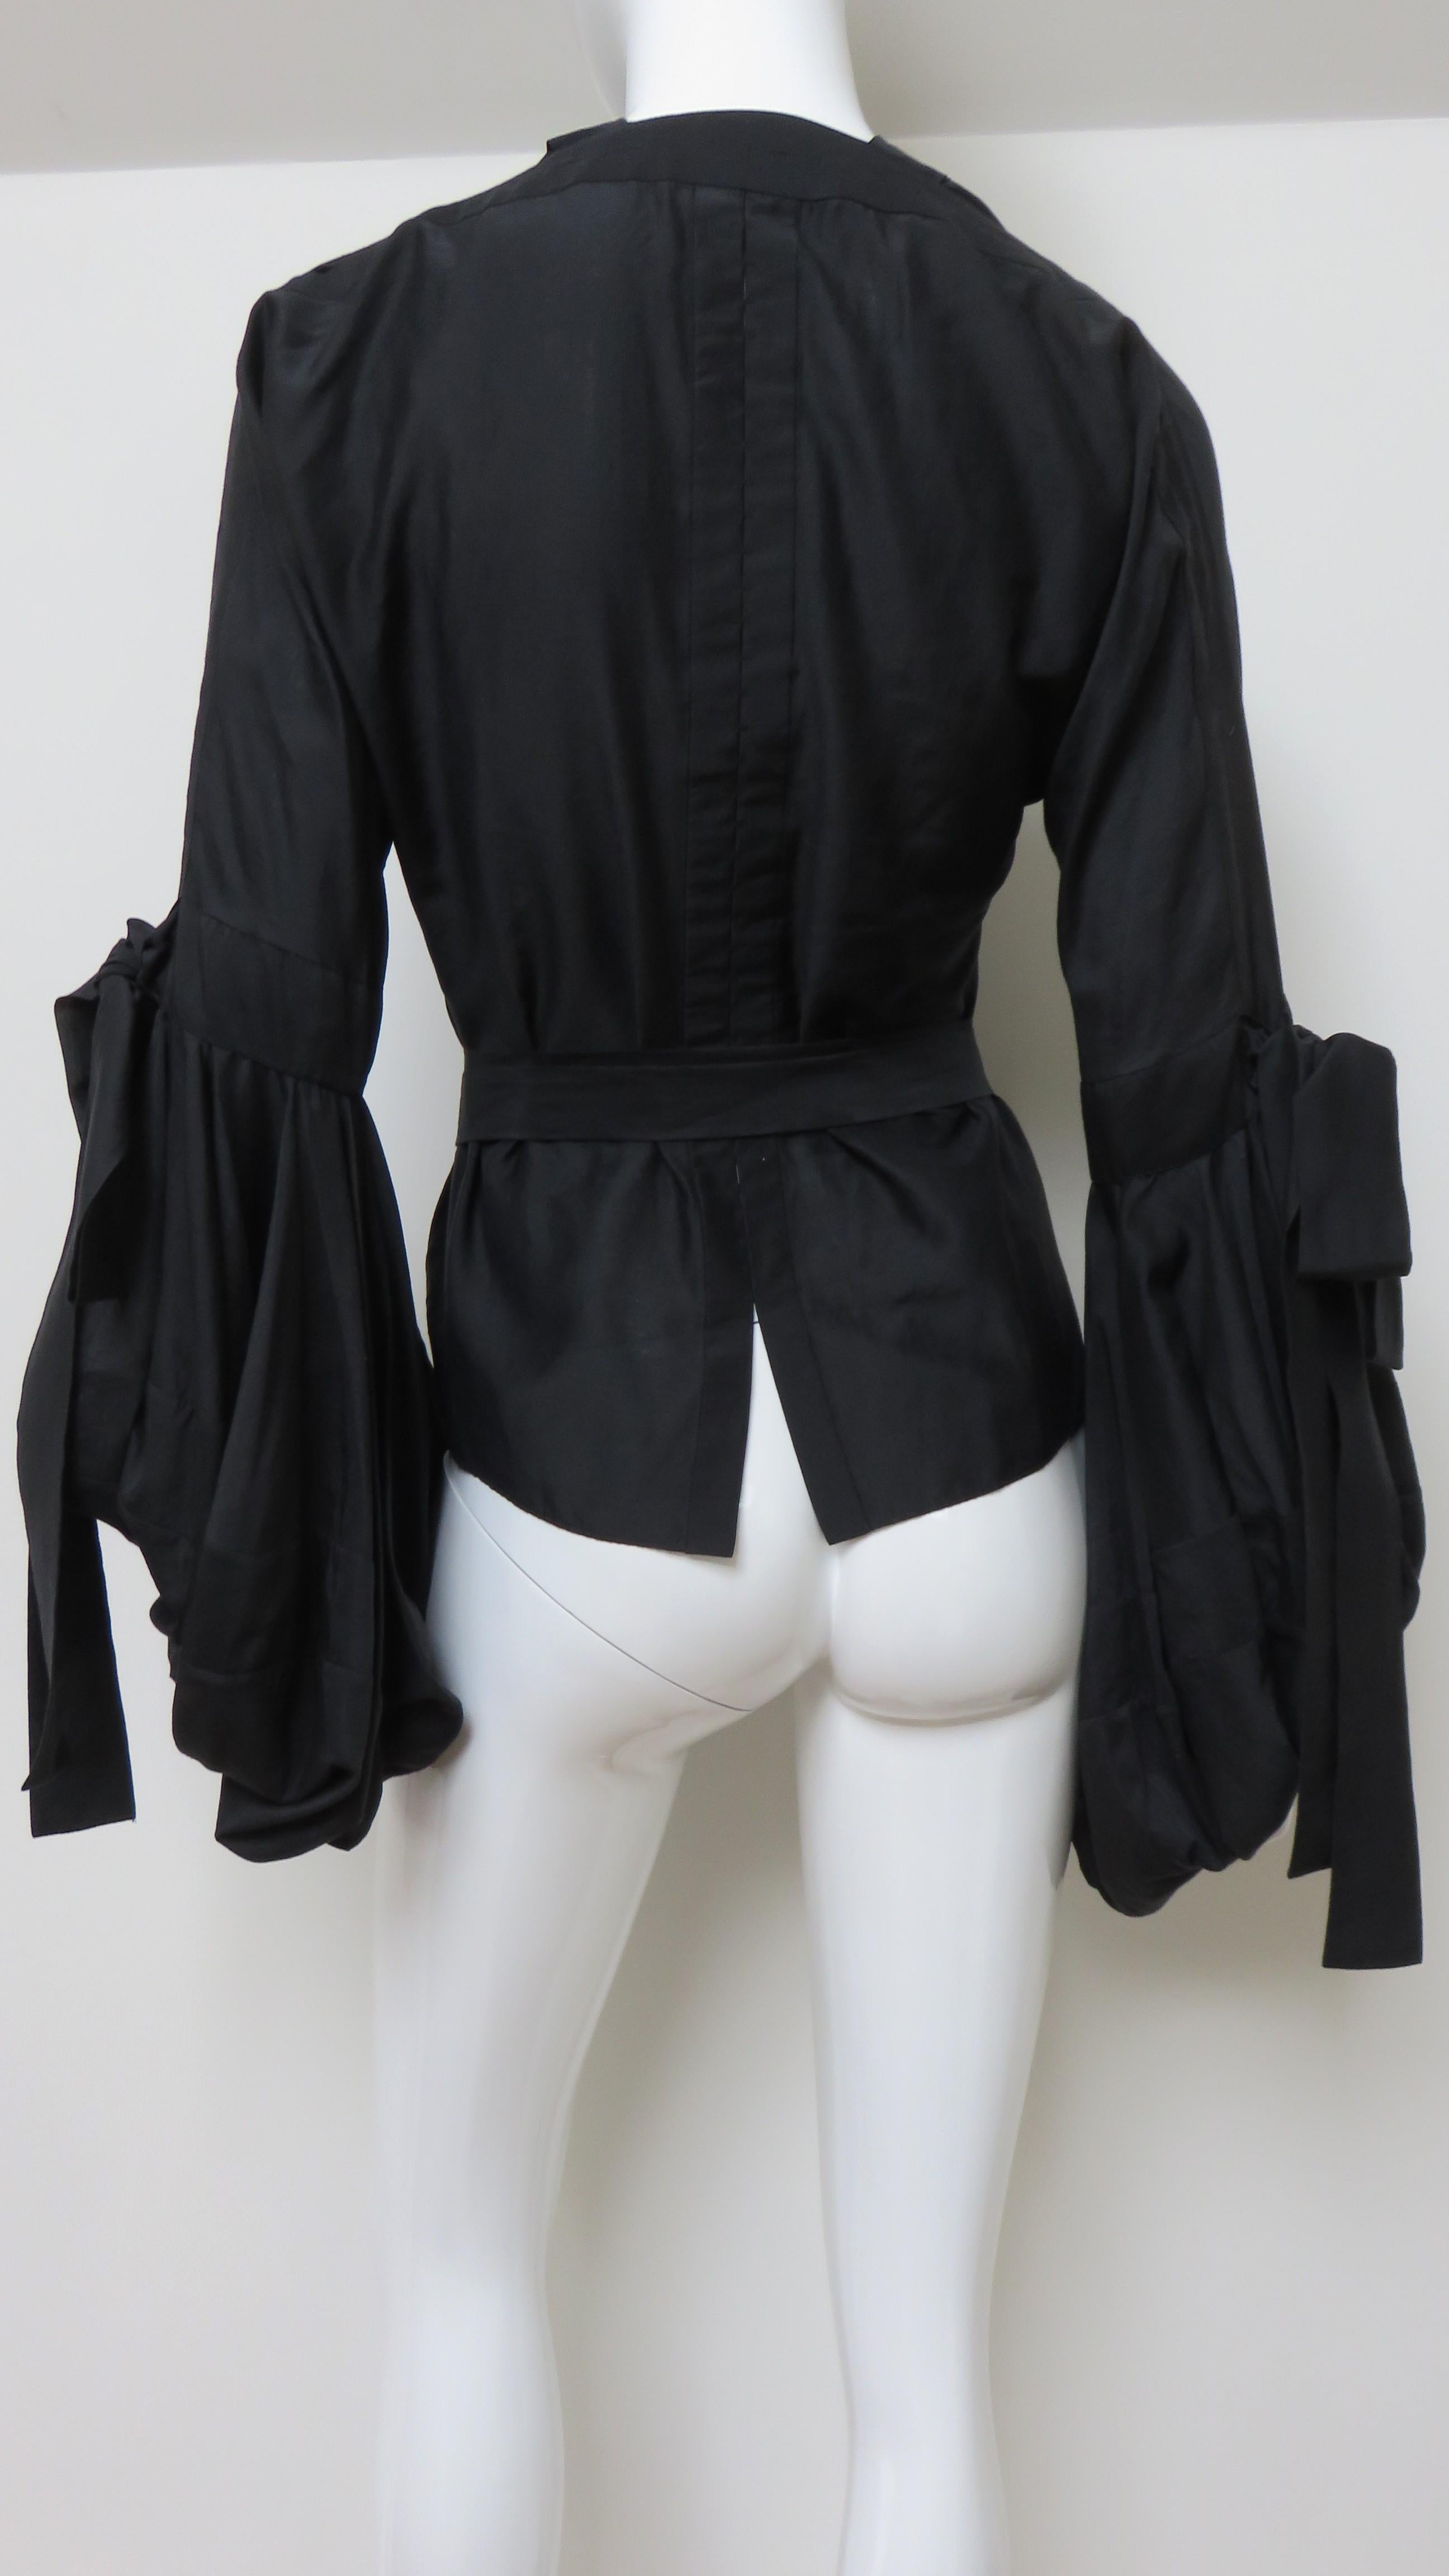 Tom Ford for Yves Saint Laurent Lace up Blouse F/W 2002 7